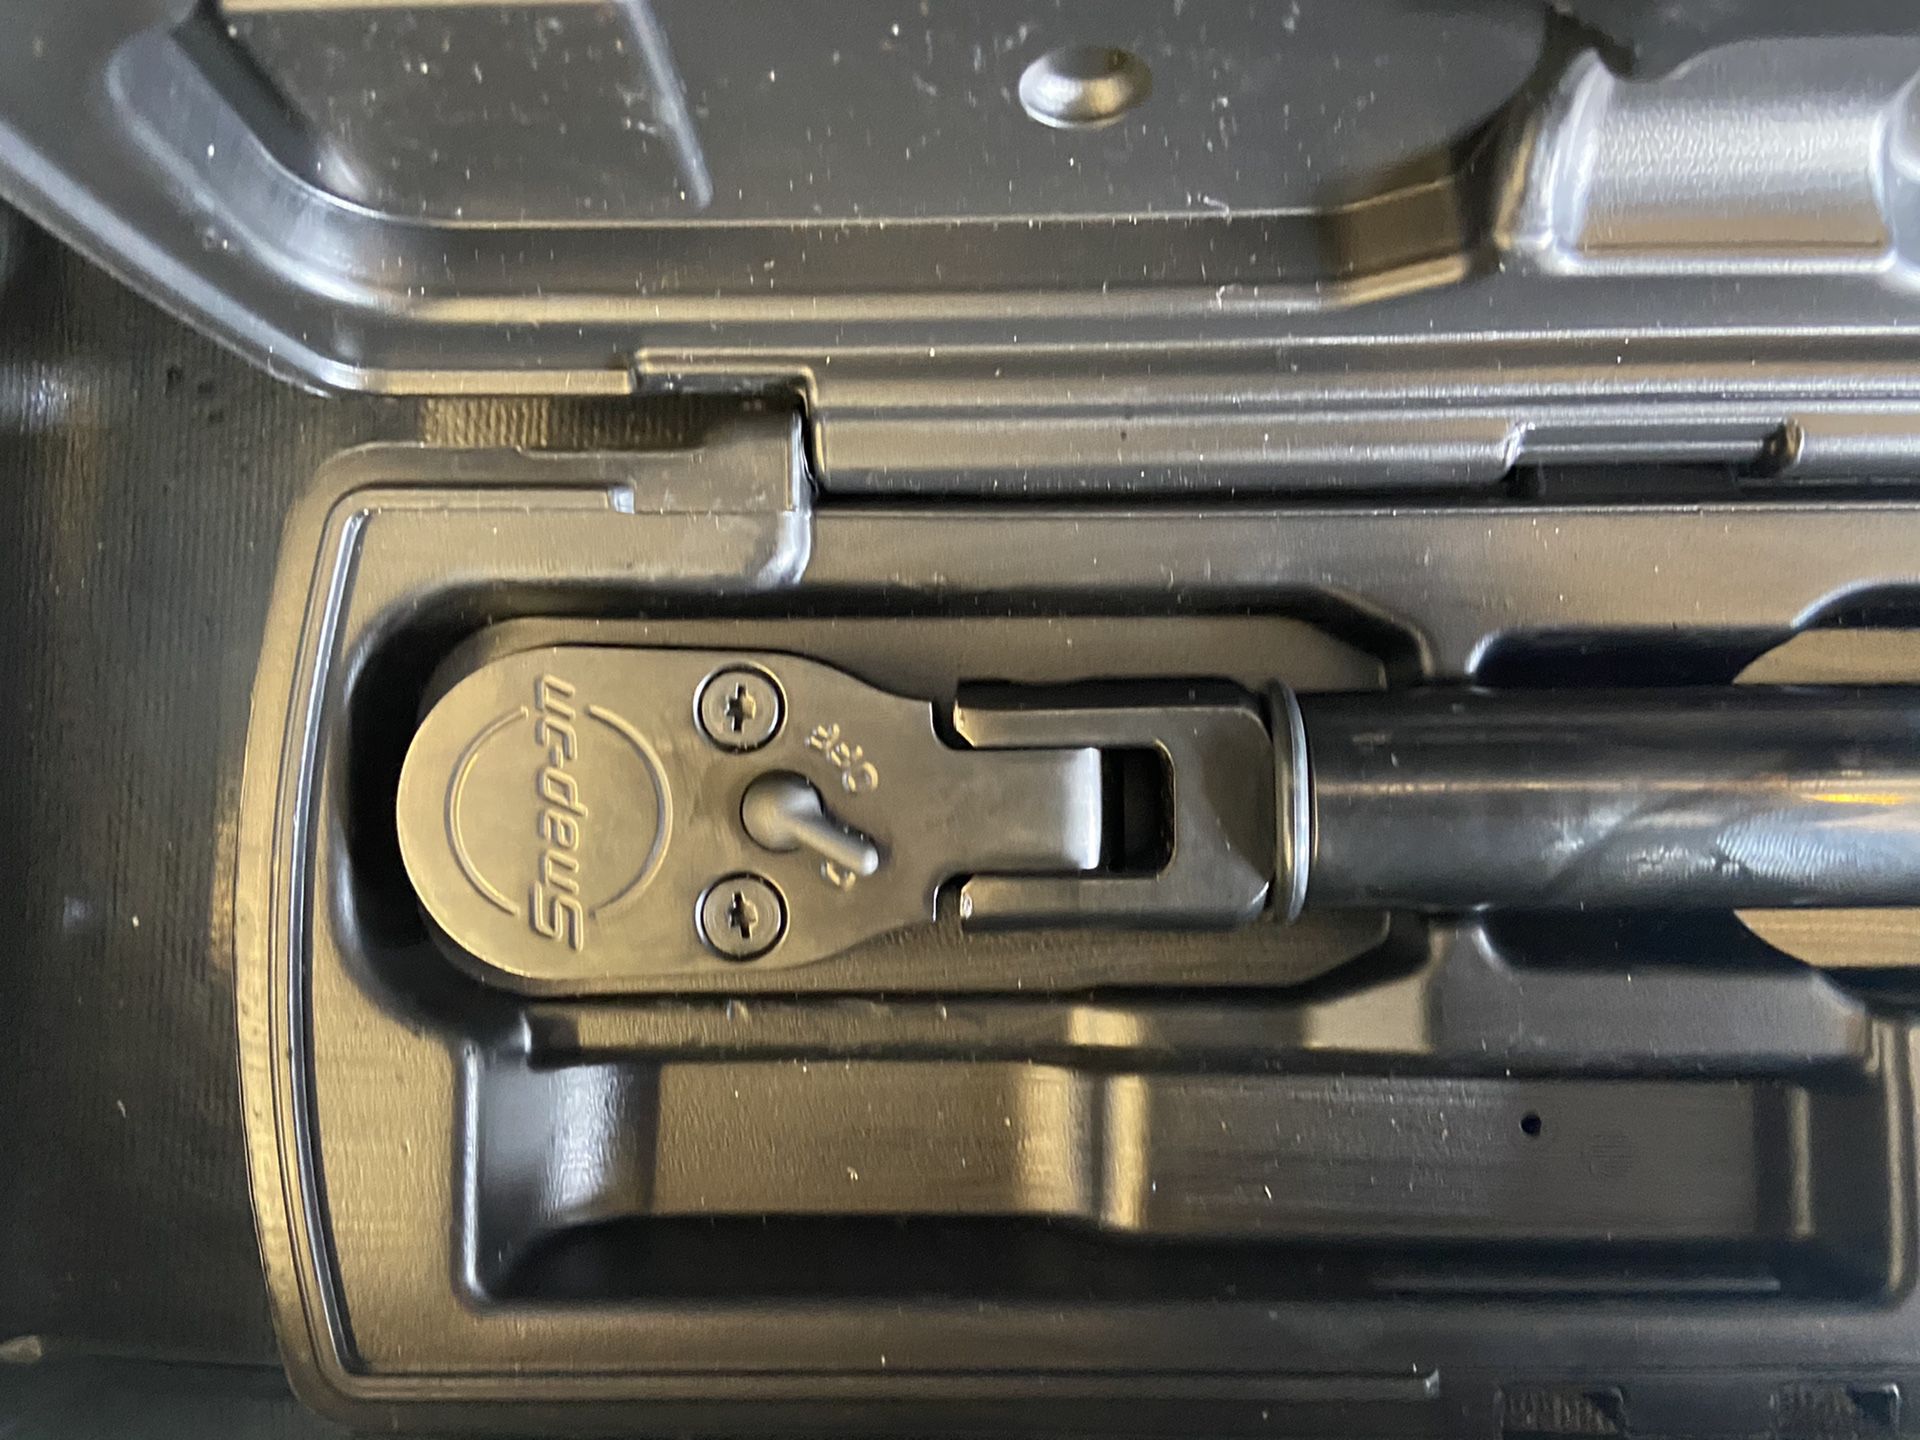 Snap On digital Torque wrench